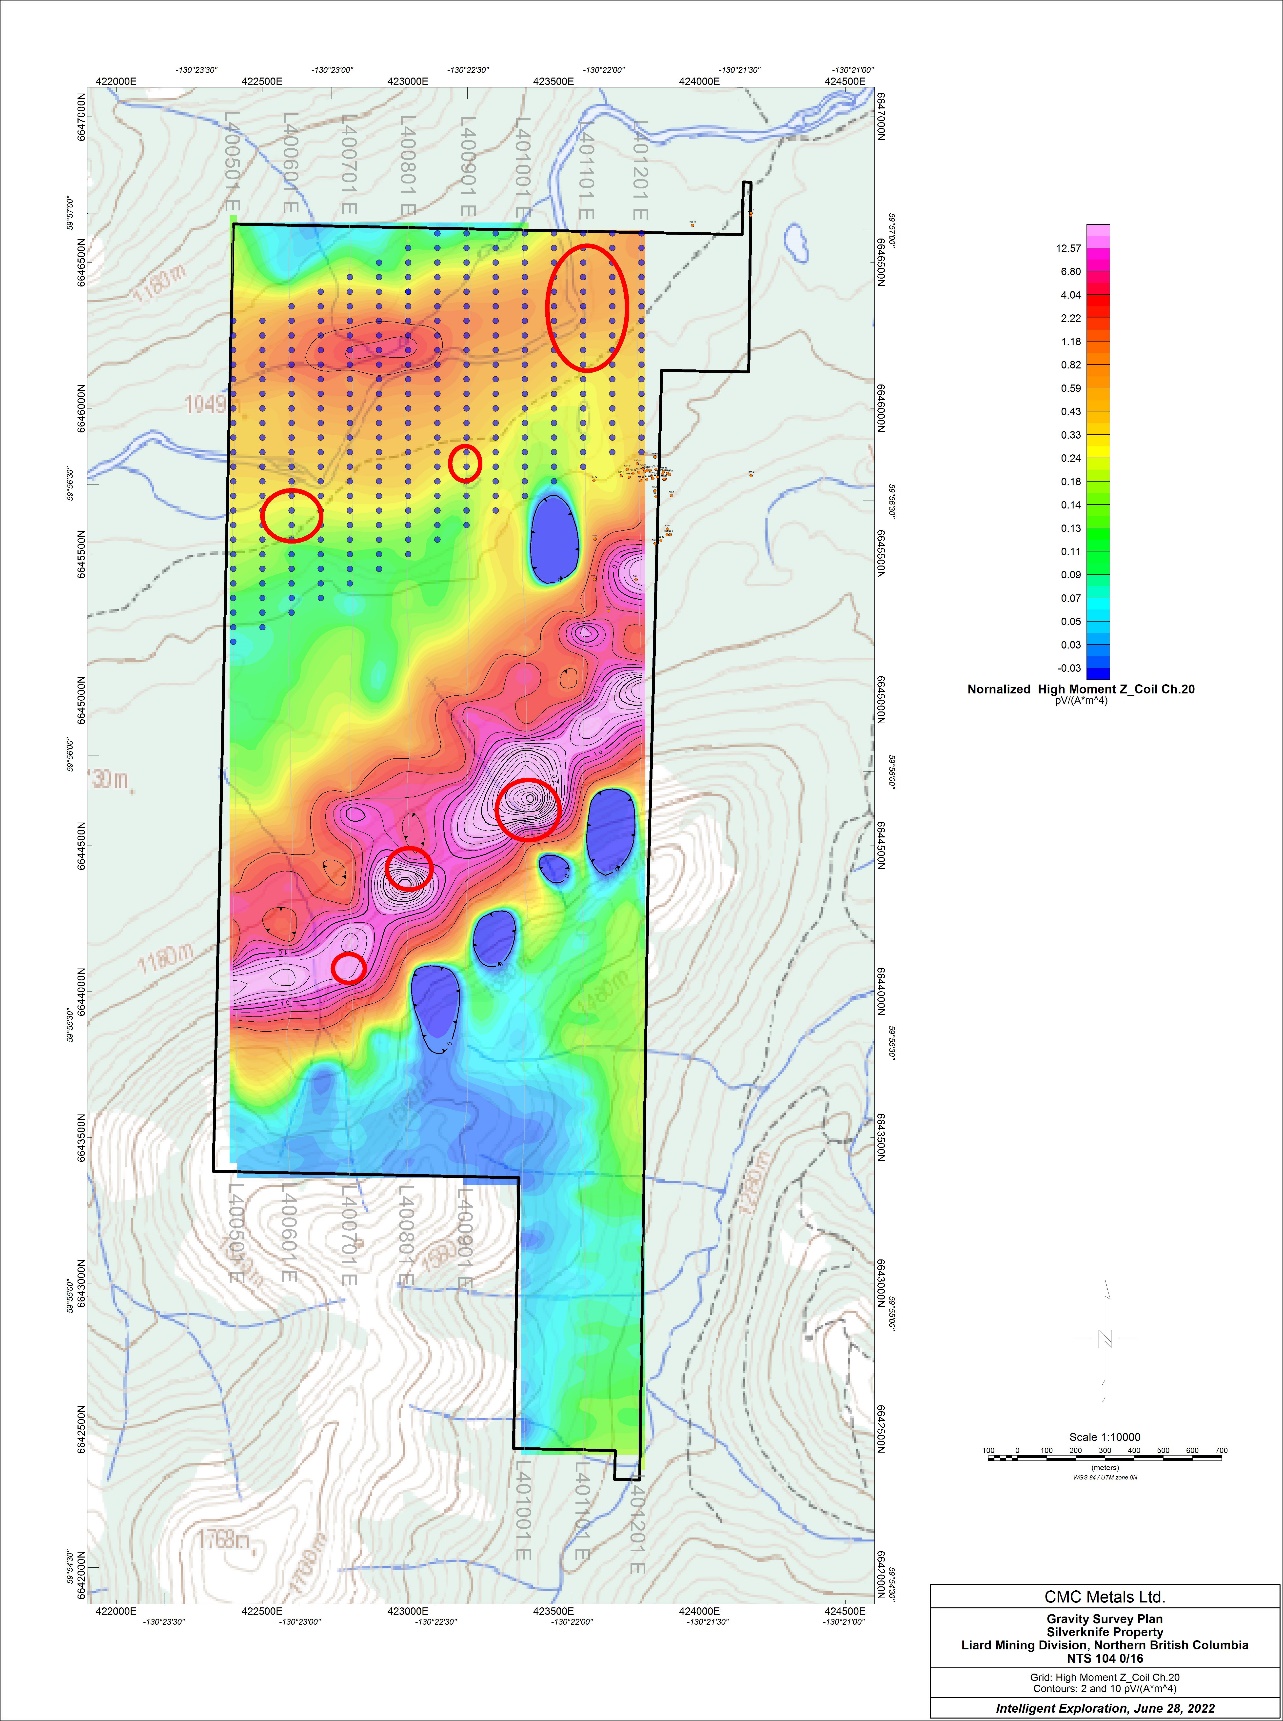 CMC Metals Ltd. Contracts Gravity Geophysical Survey to Further Delineate CRD Targets at its Silverknife Property, Northern British Columbia